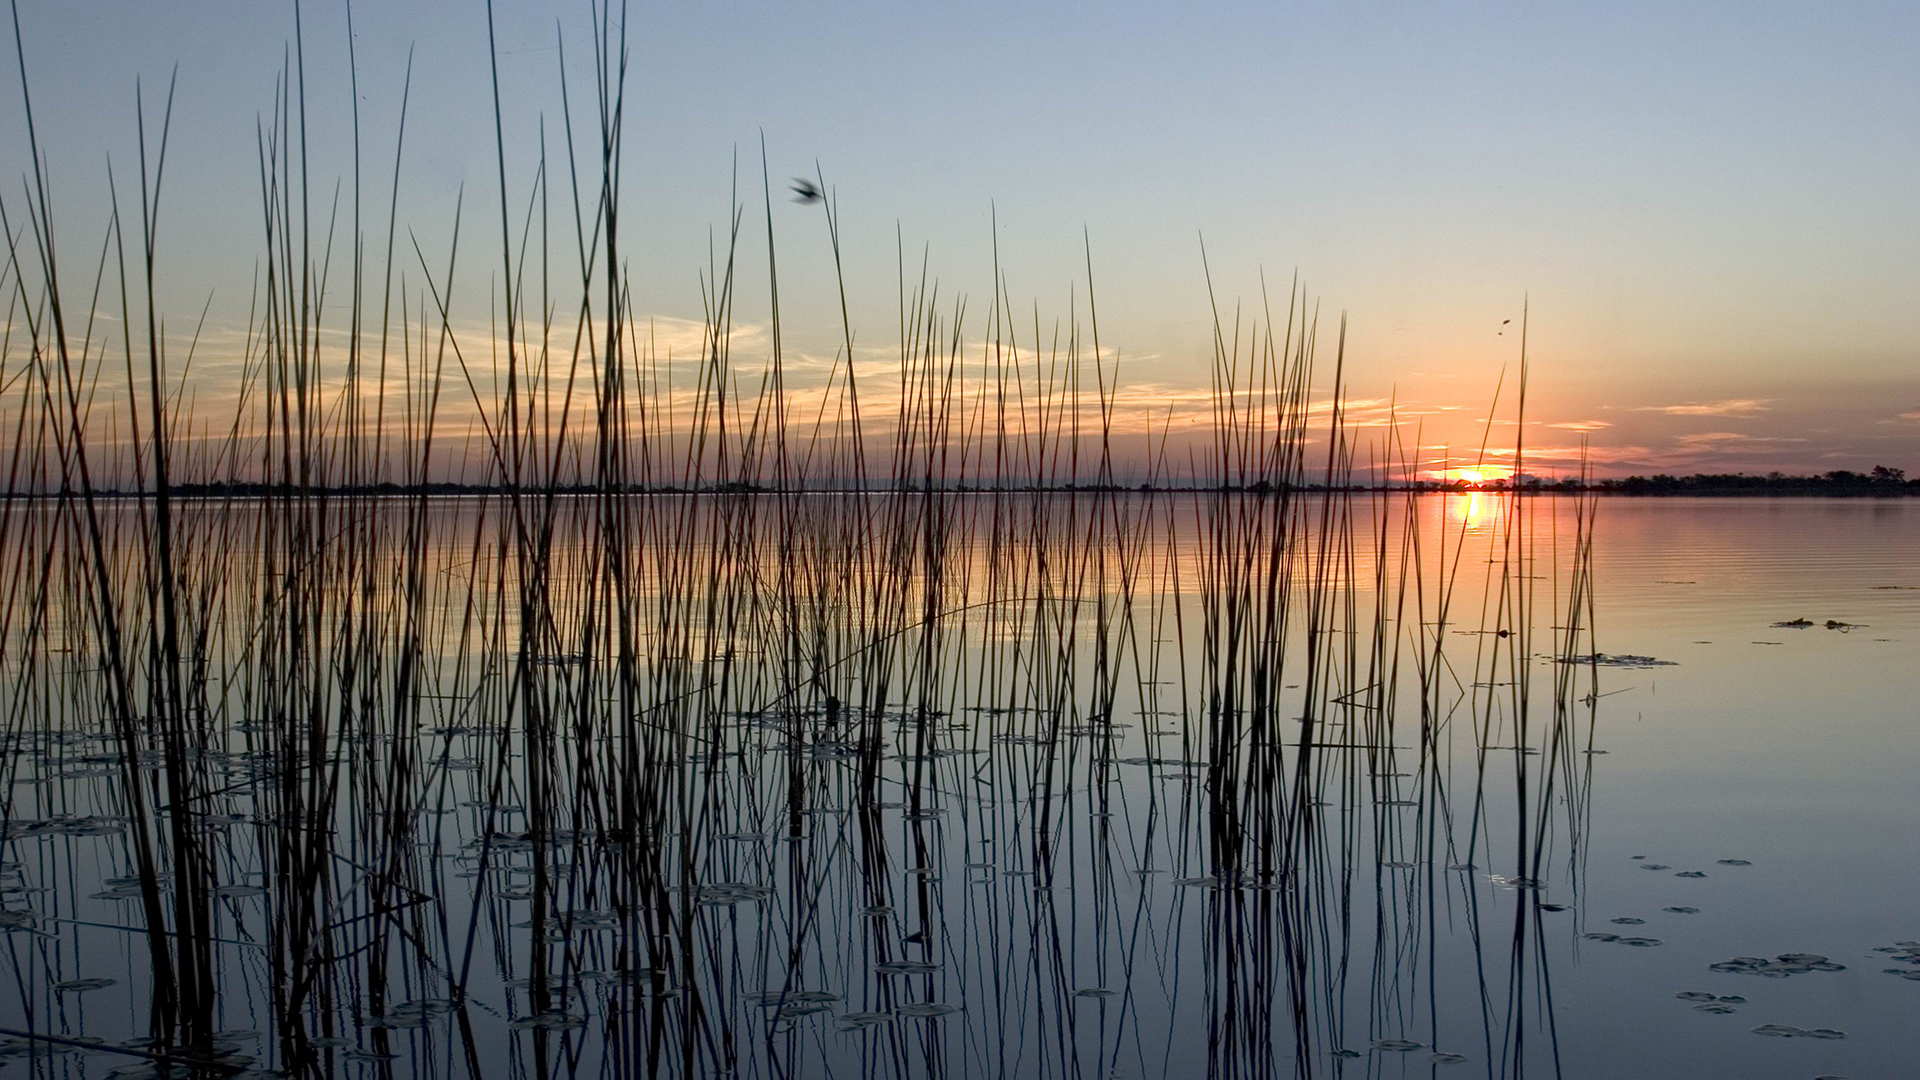 The Iberá Wetlands in Argentina are one of the largest wetlands in the world and one of the continent's most important drinking water reserves (Photo by Mariana Silvia Eliano/Cover/Getty Images)